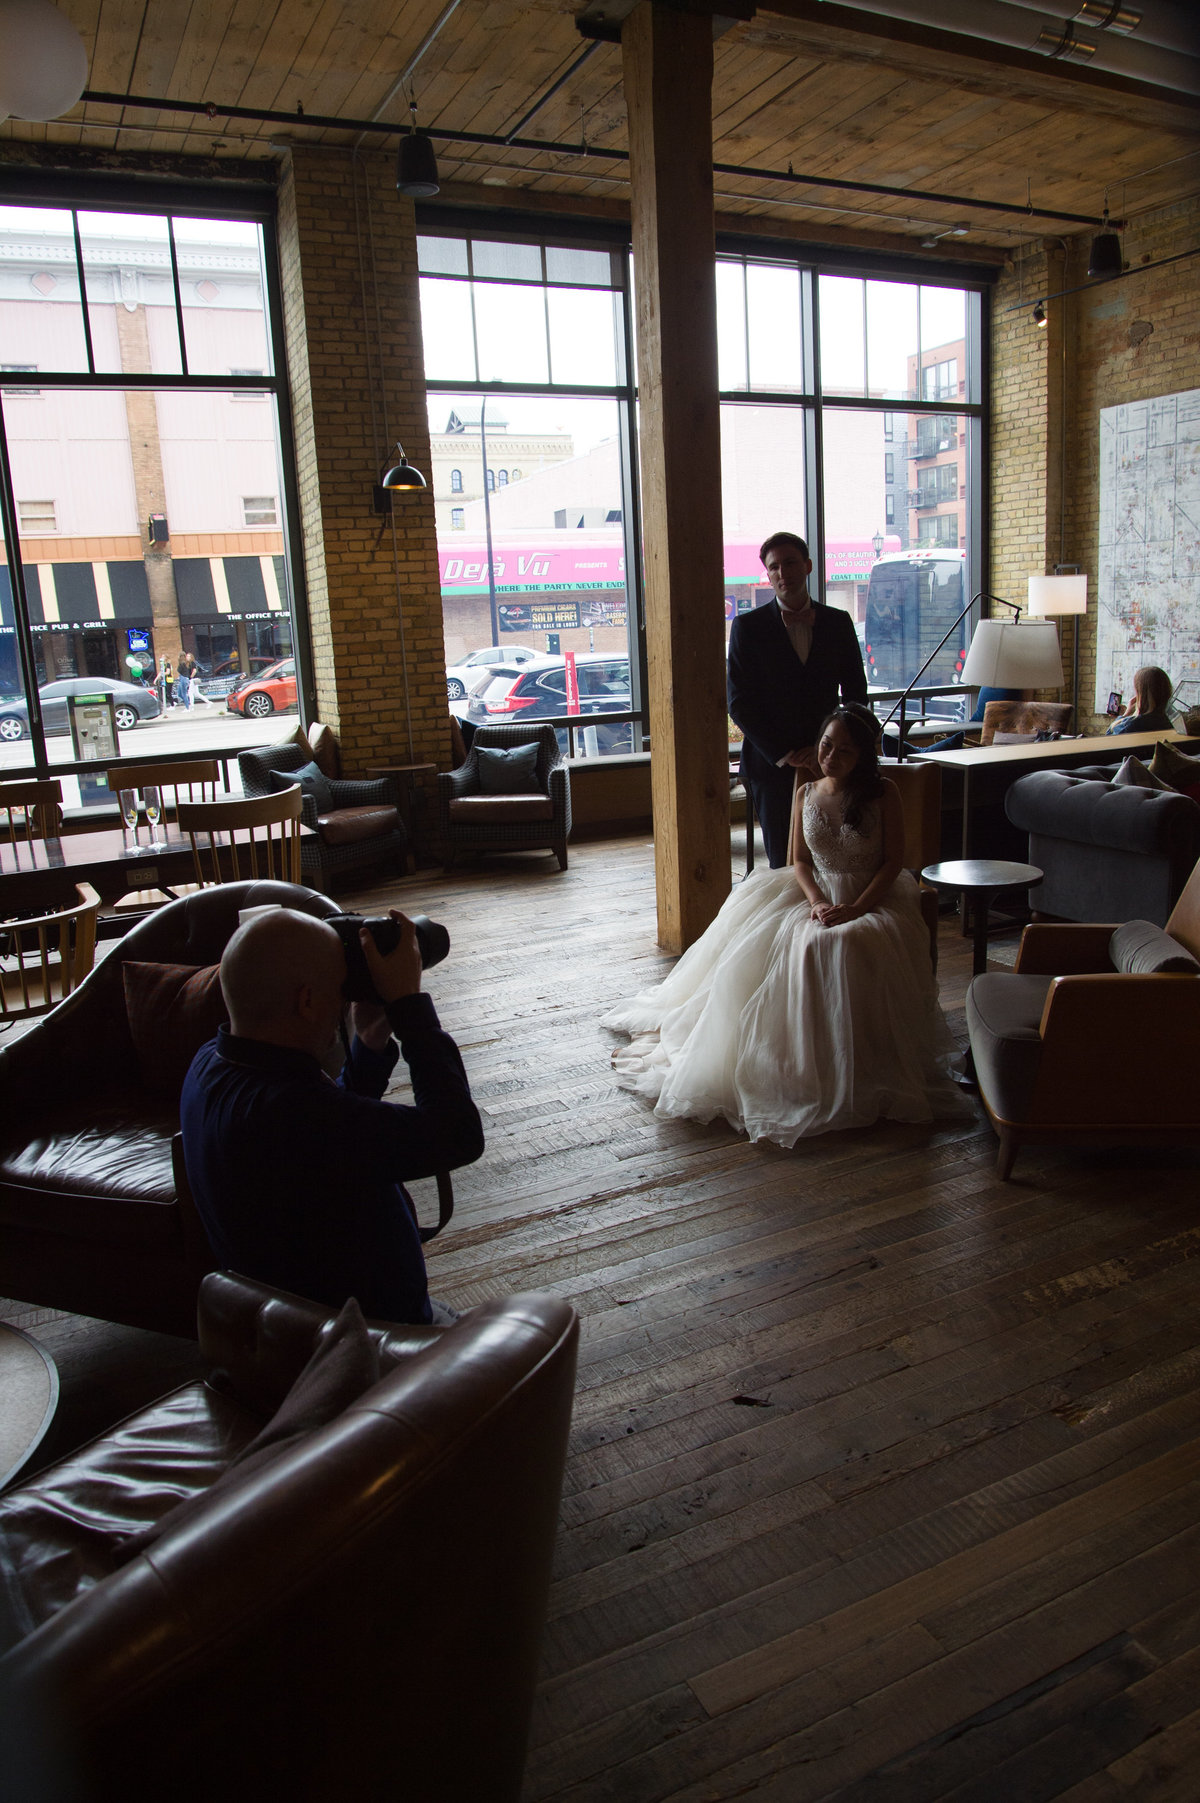 Behind the scenes wedding photography.